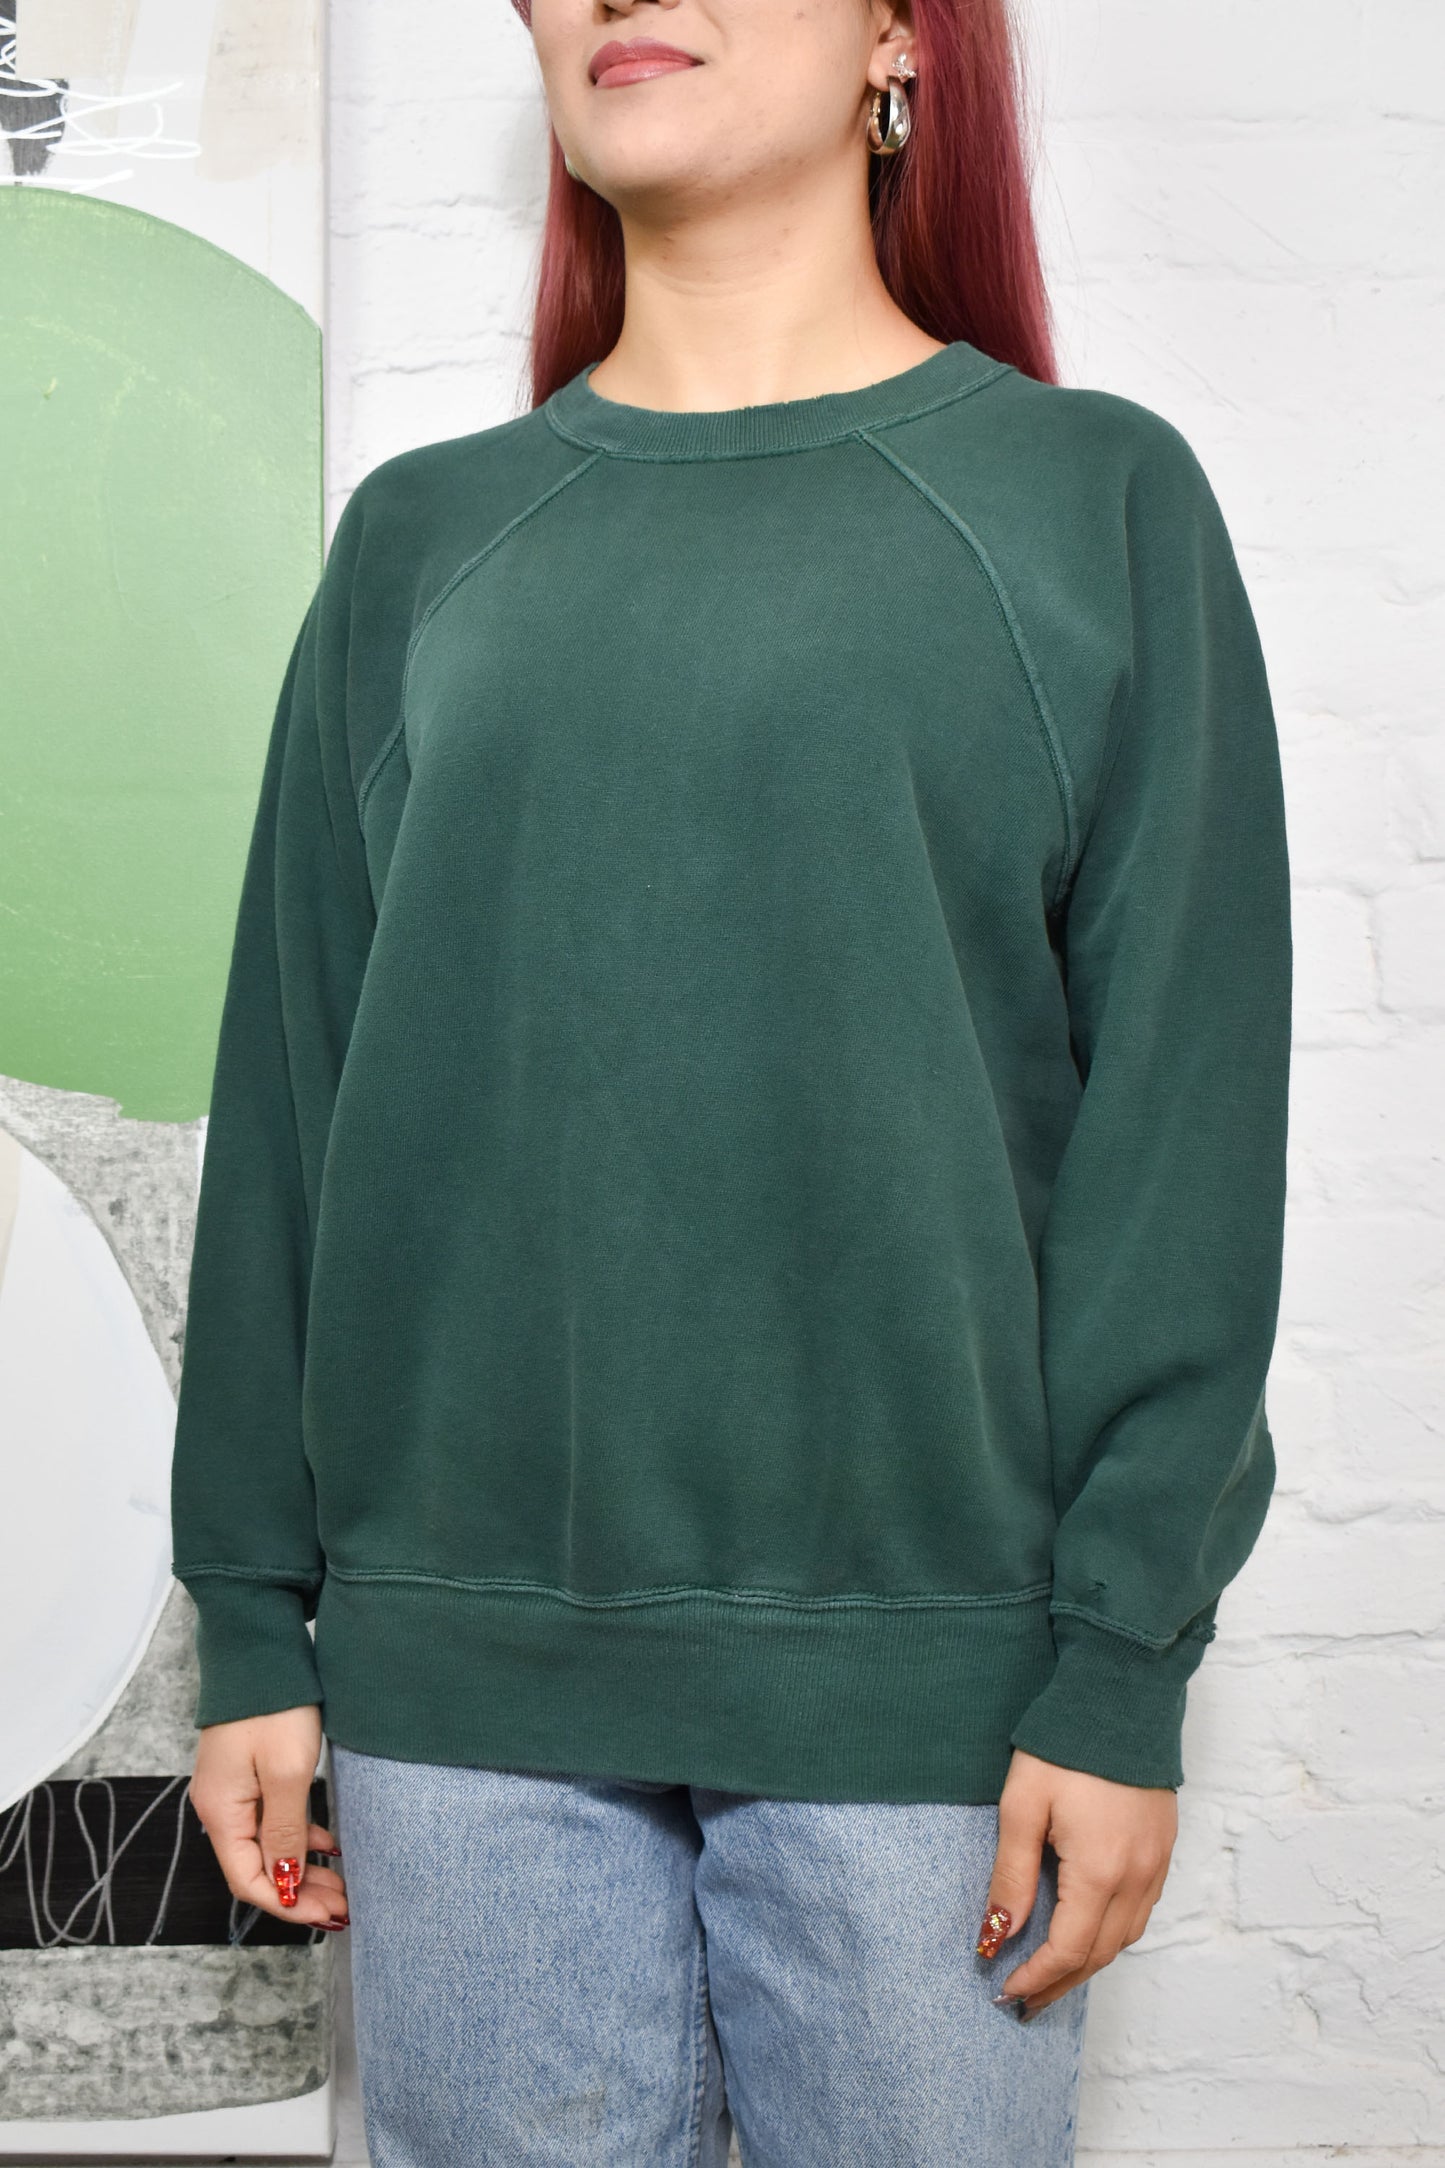 Vintage 50's/60's "Penney's" Forest Green Sweatshirt